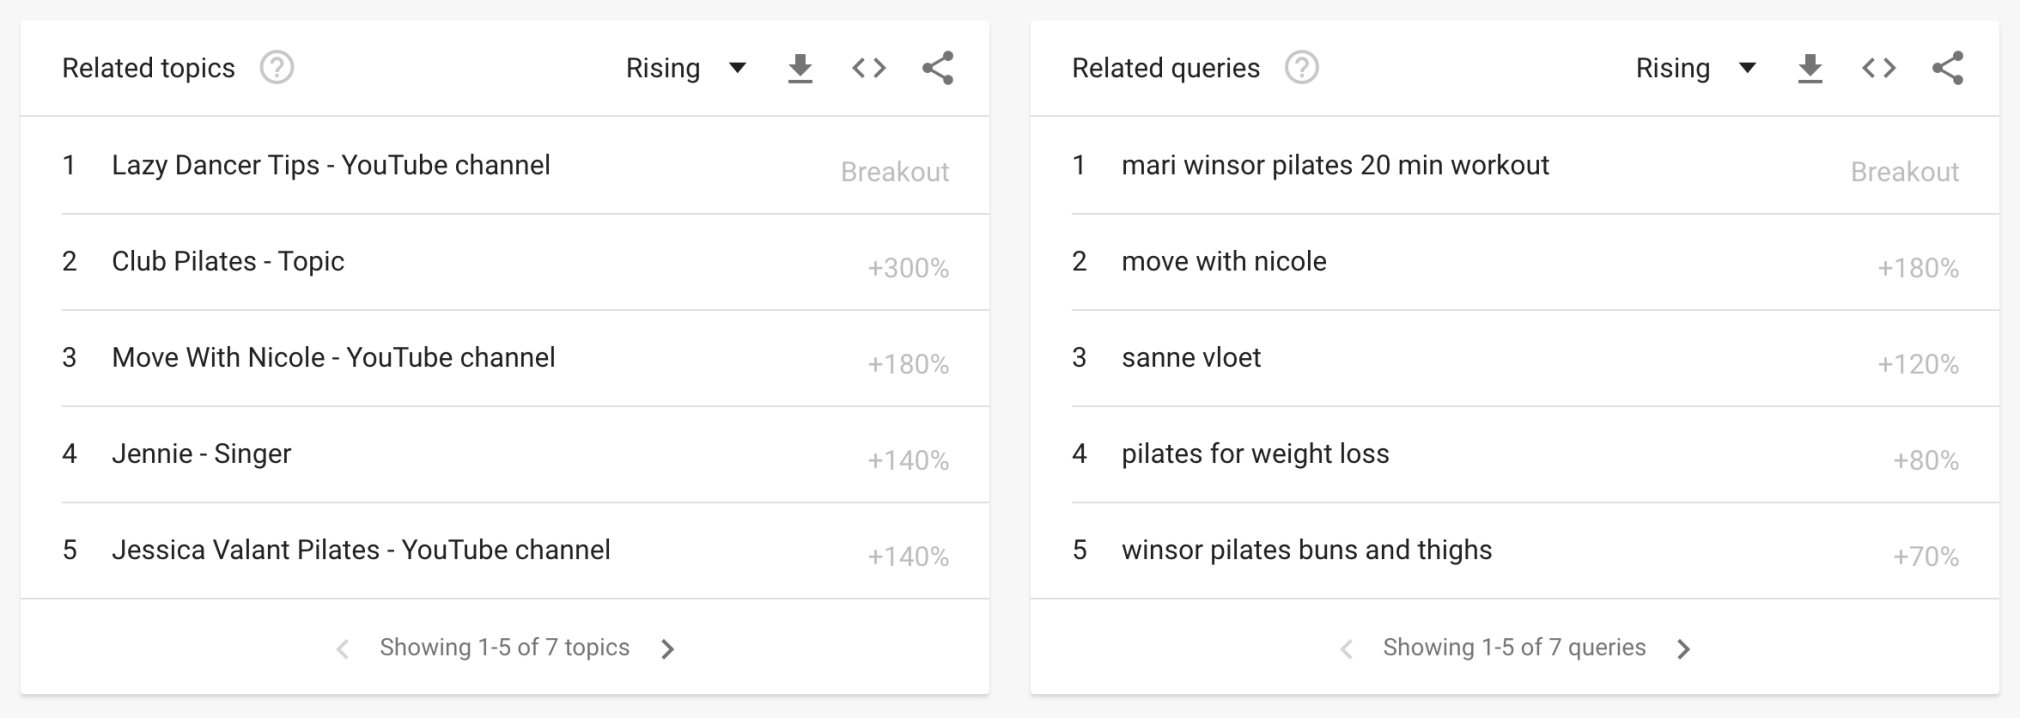 related topics for "pilates"